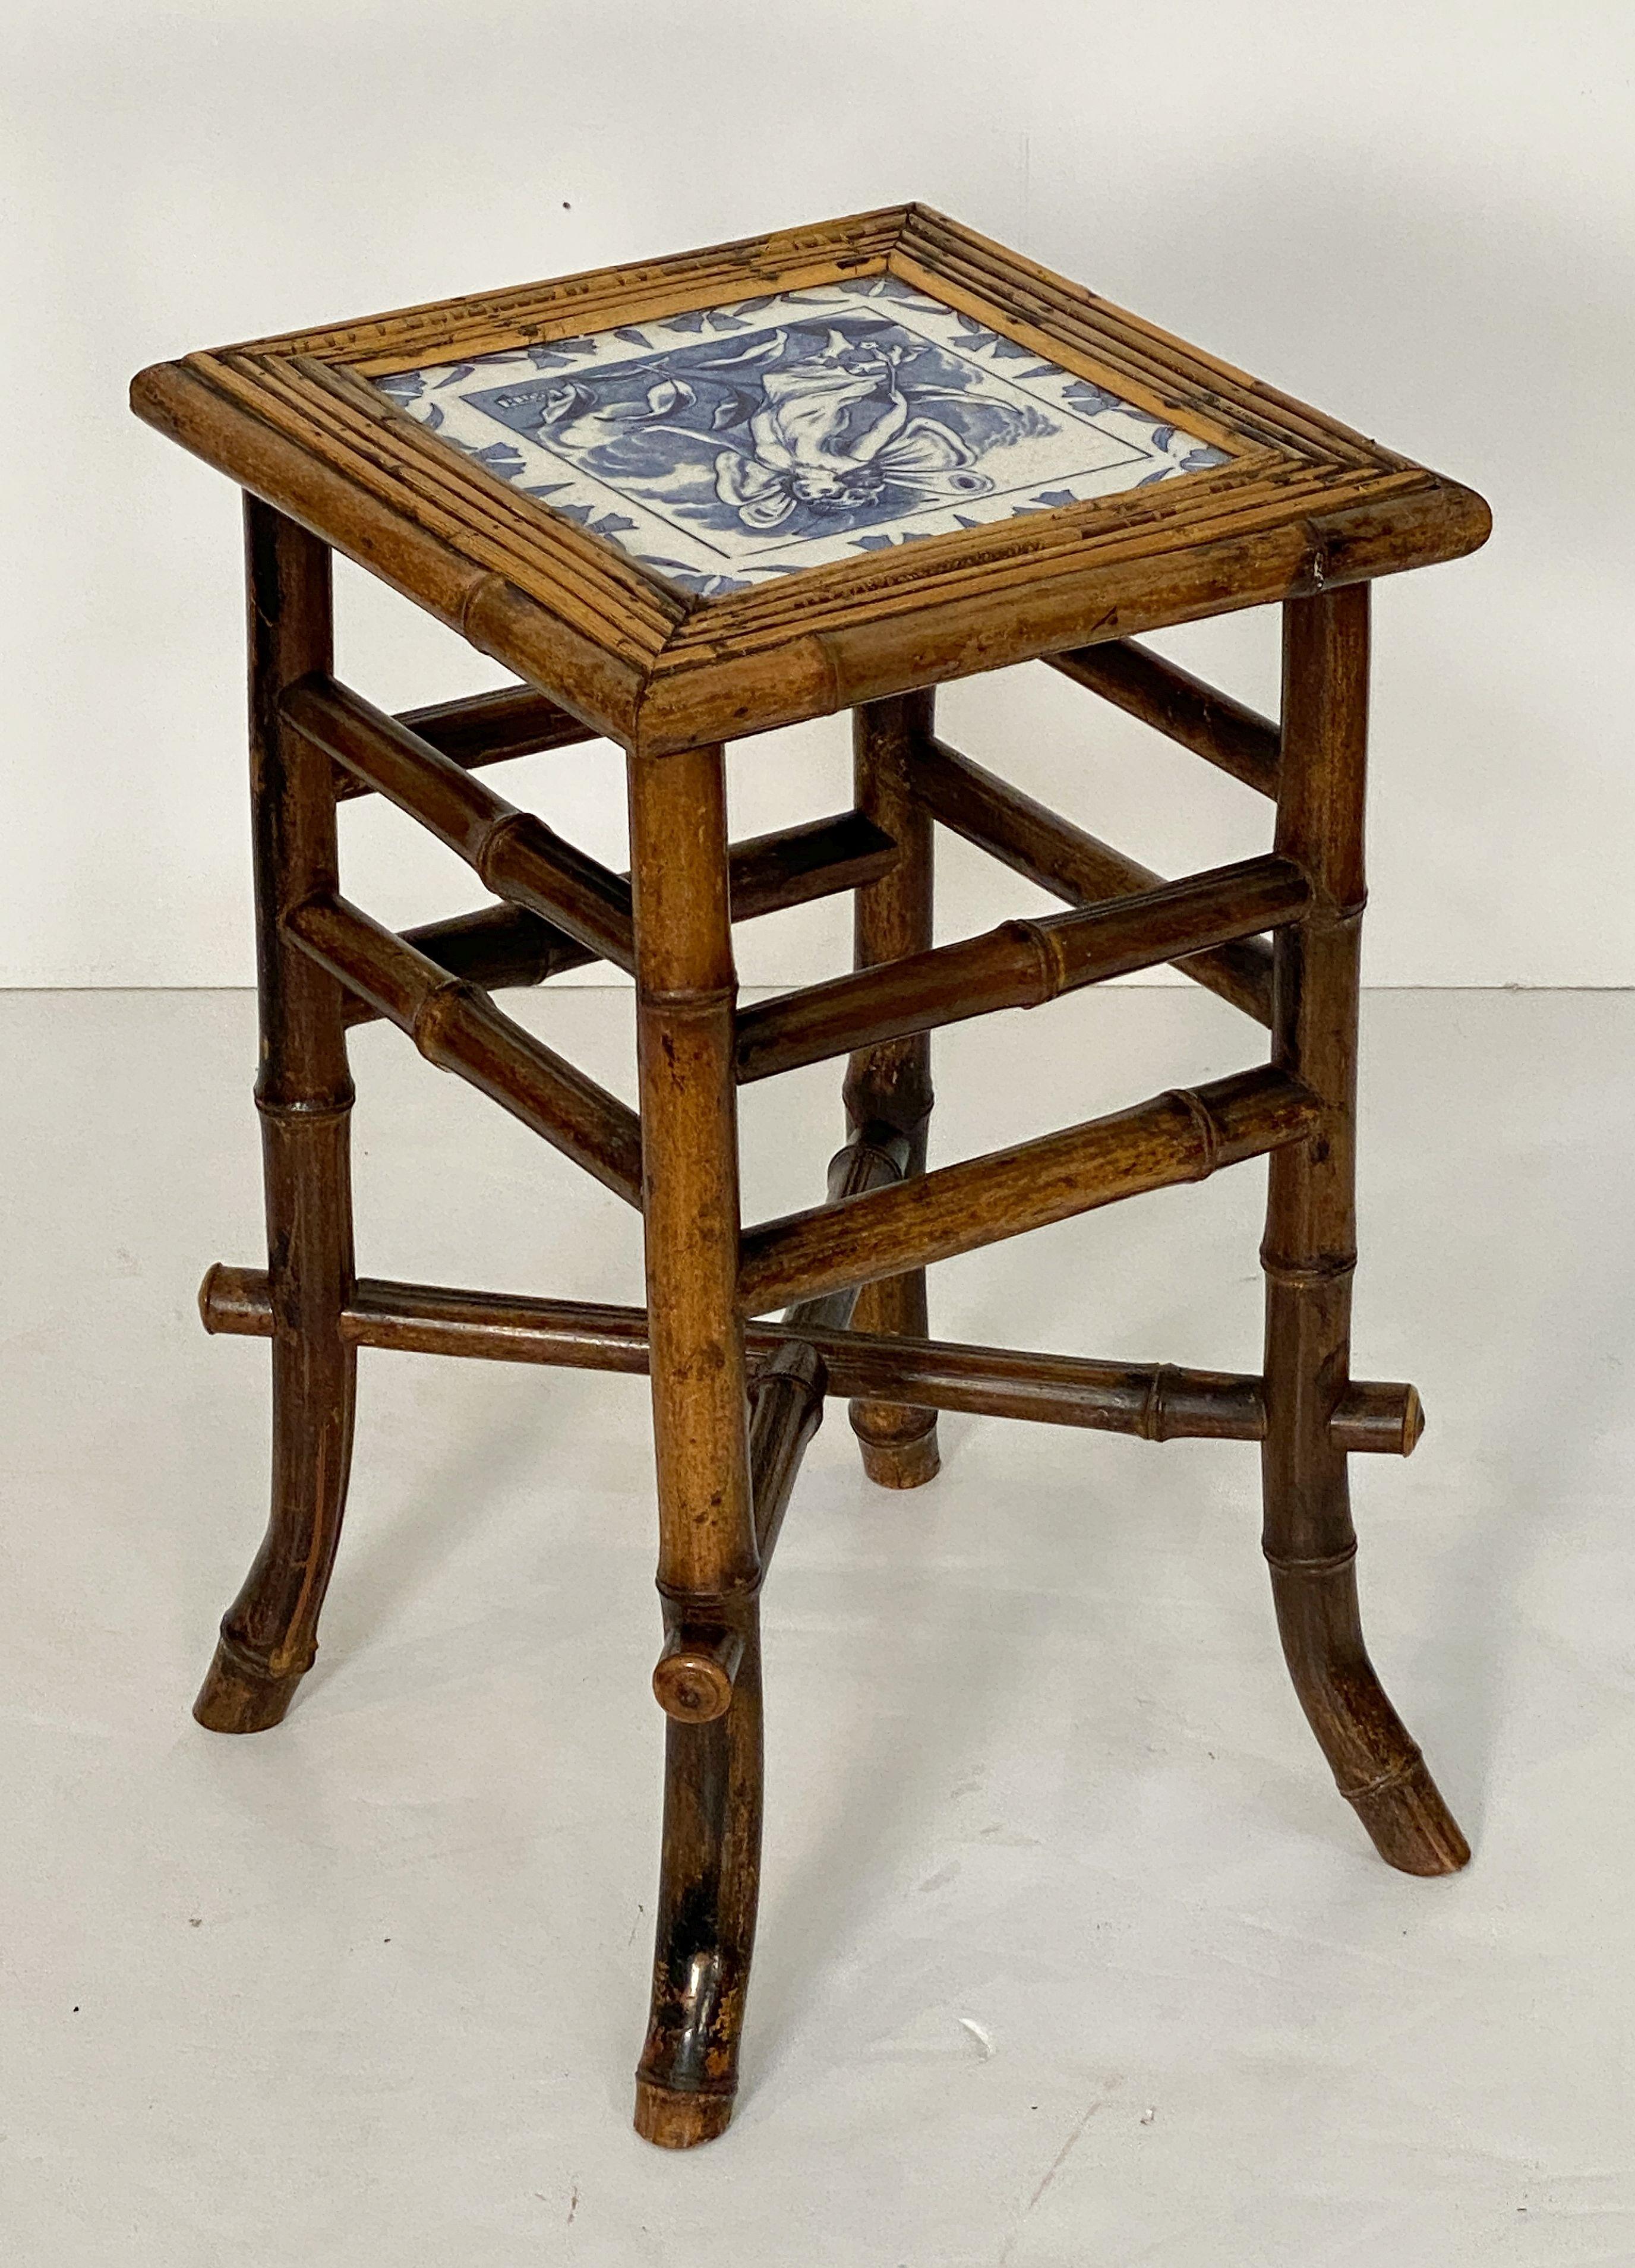 English Bamboo Table or Stool with Tile Seat from the Aesthetic Movement Era For Sale 2